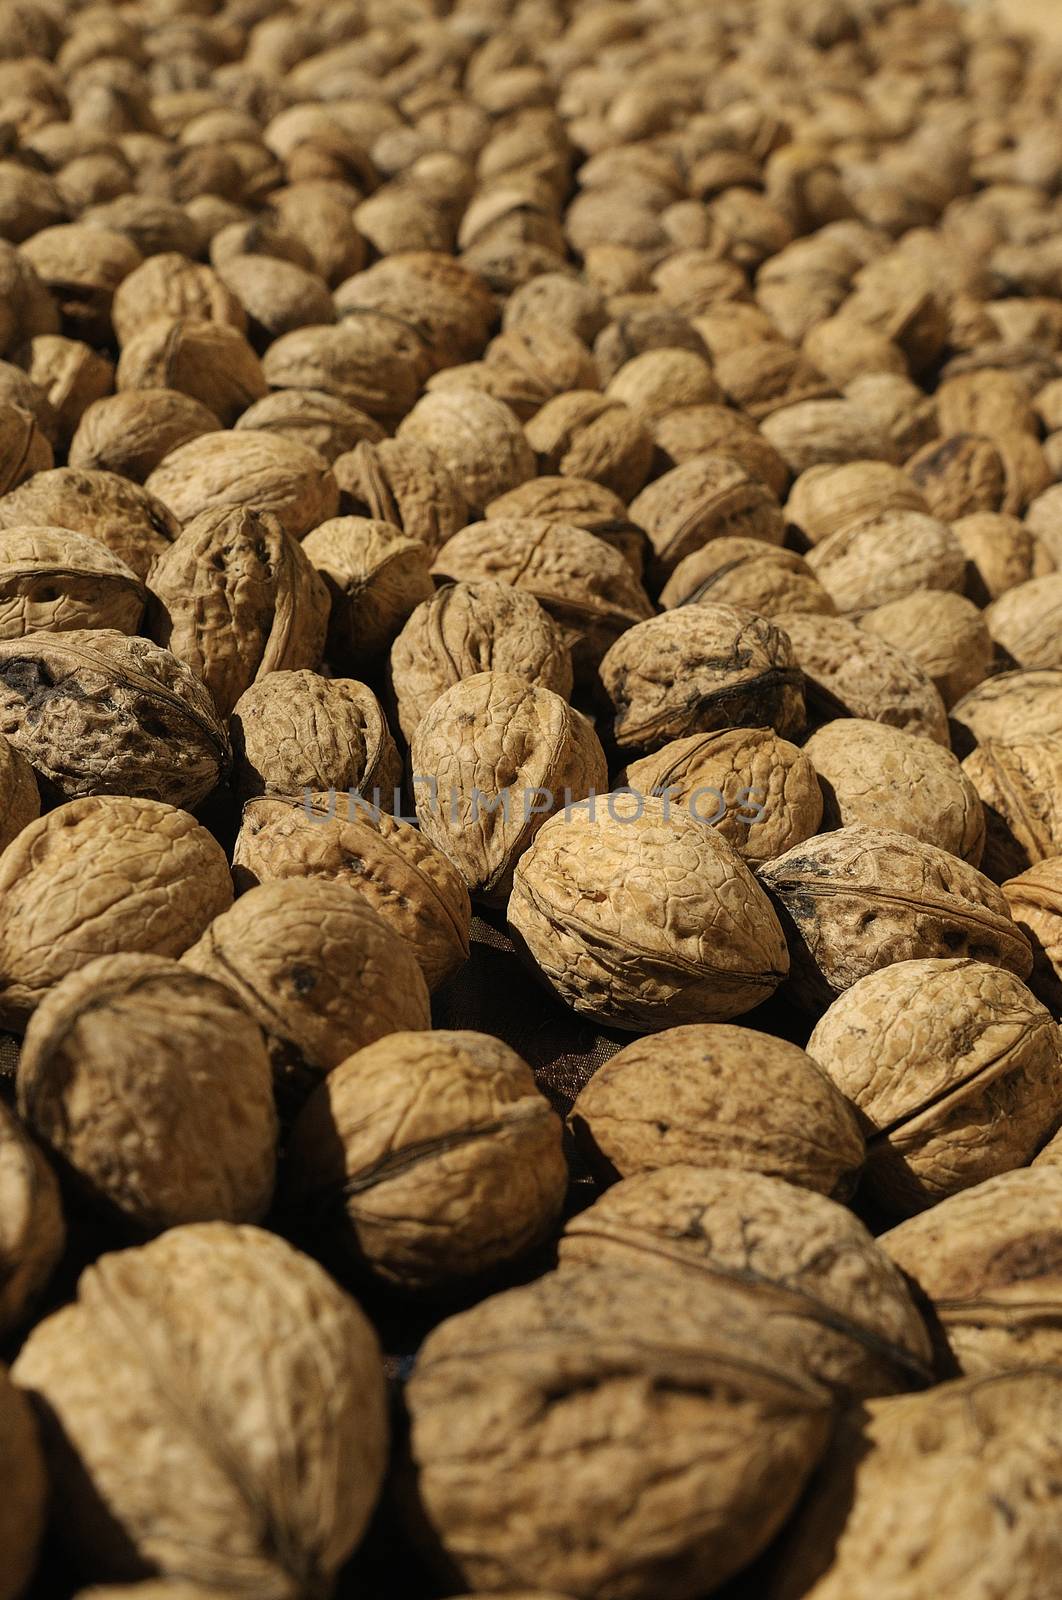 Group of nuts, nuts, vegetable oil by jalonsohu@gmail.com